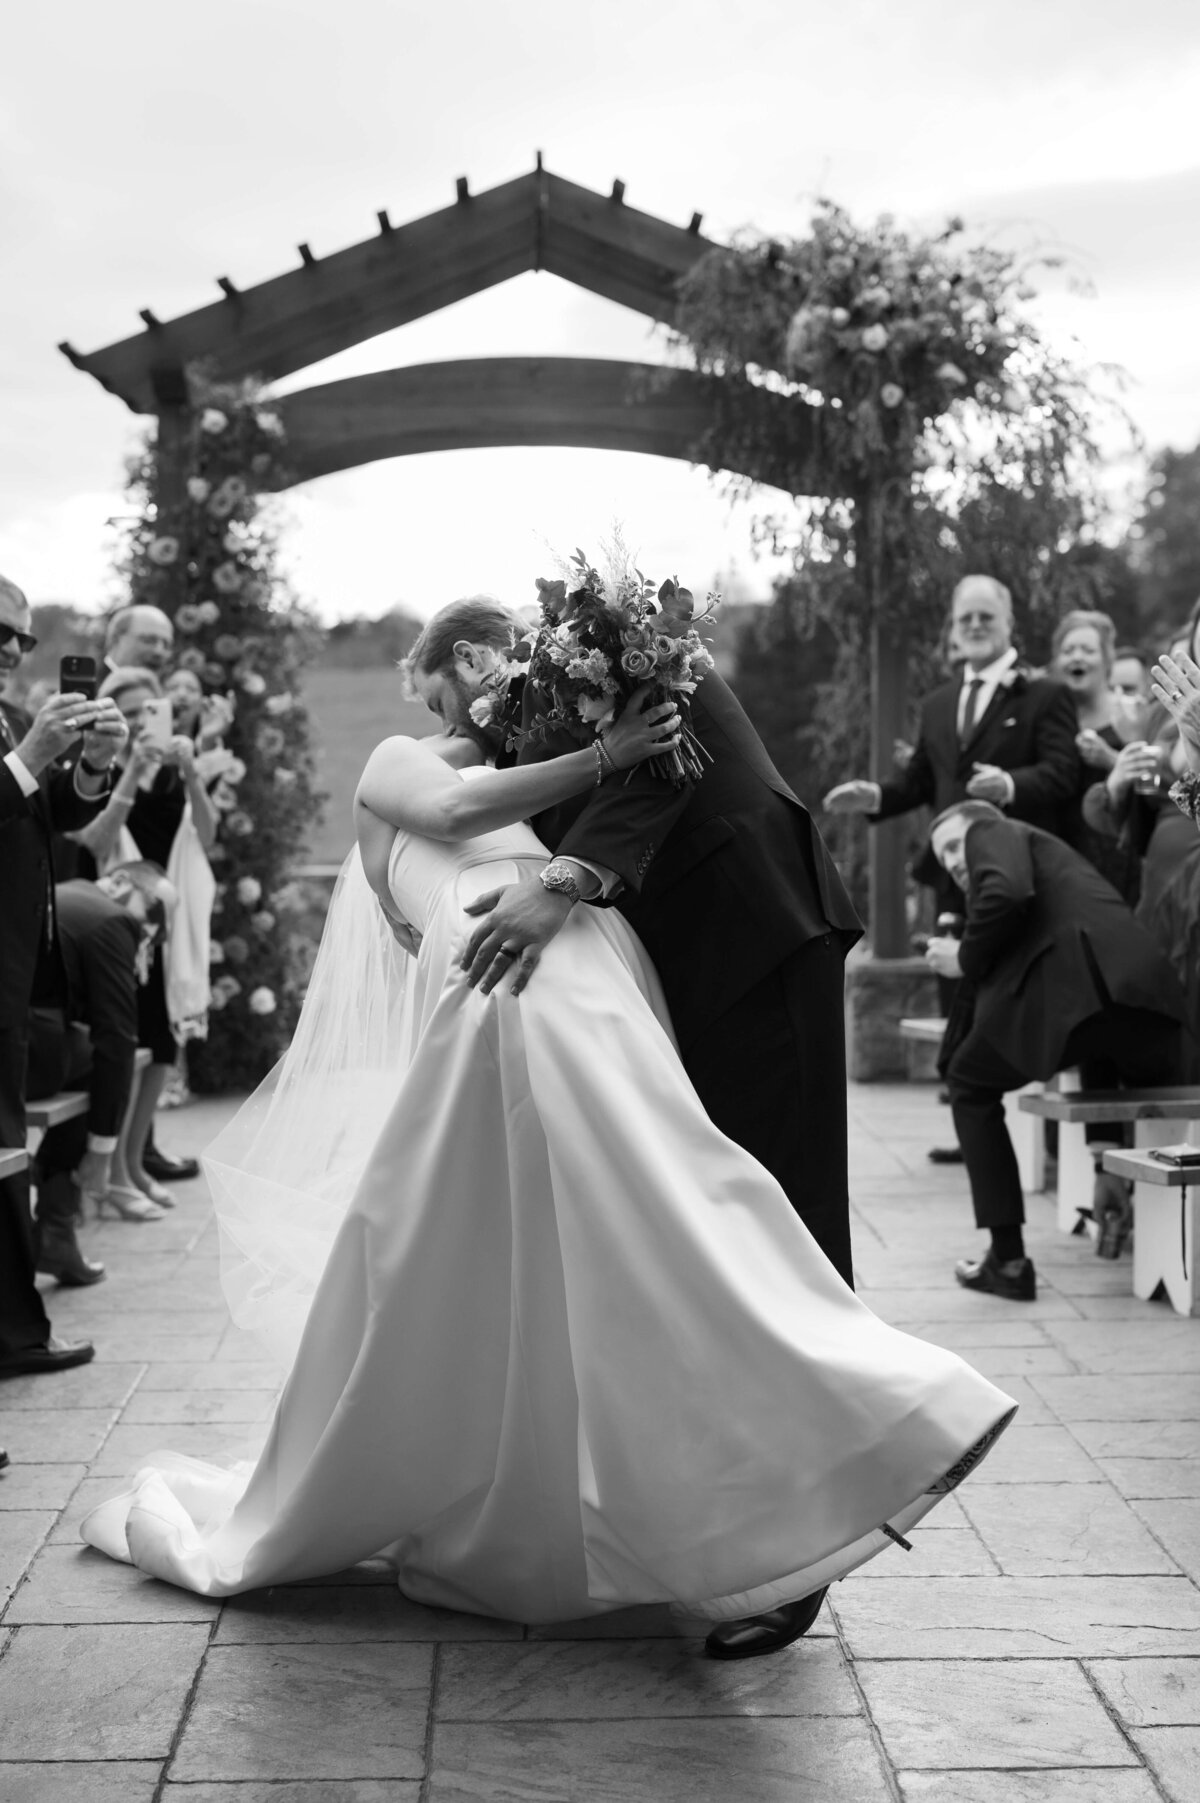 black and white wedding picture with groom dipping his bride backwards at the end of the aisle as they exit their wedding ceremony with their guests standing and clapping in celebration